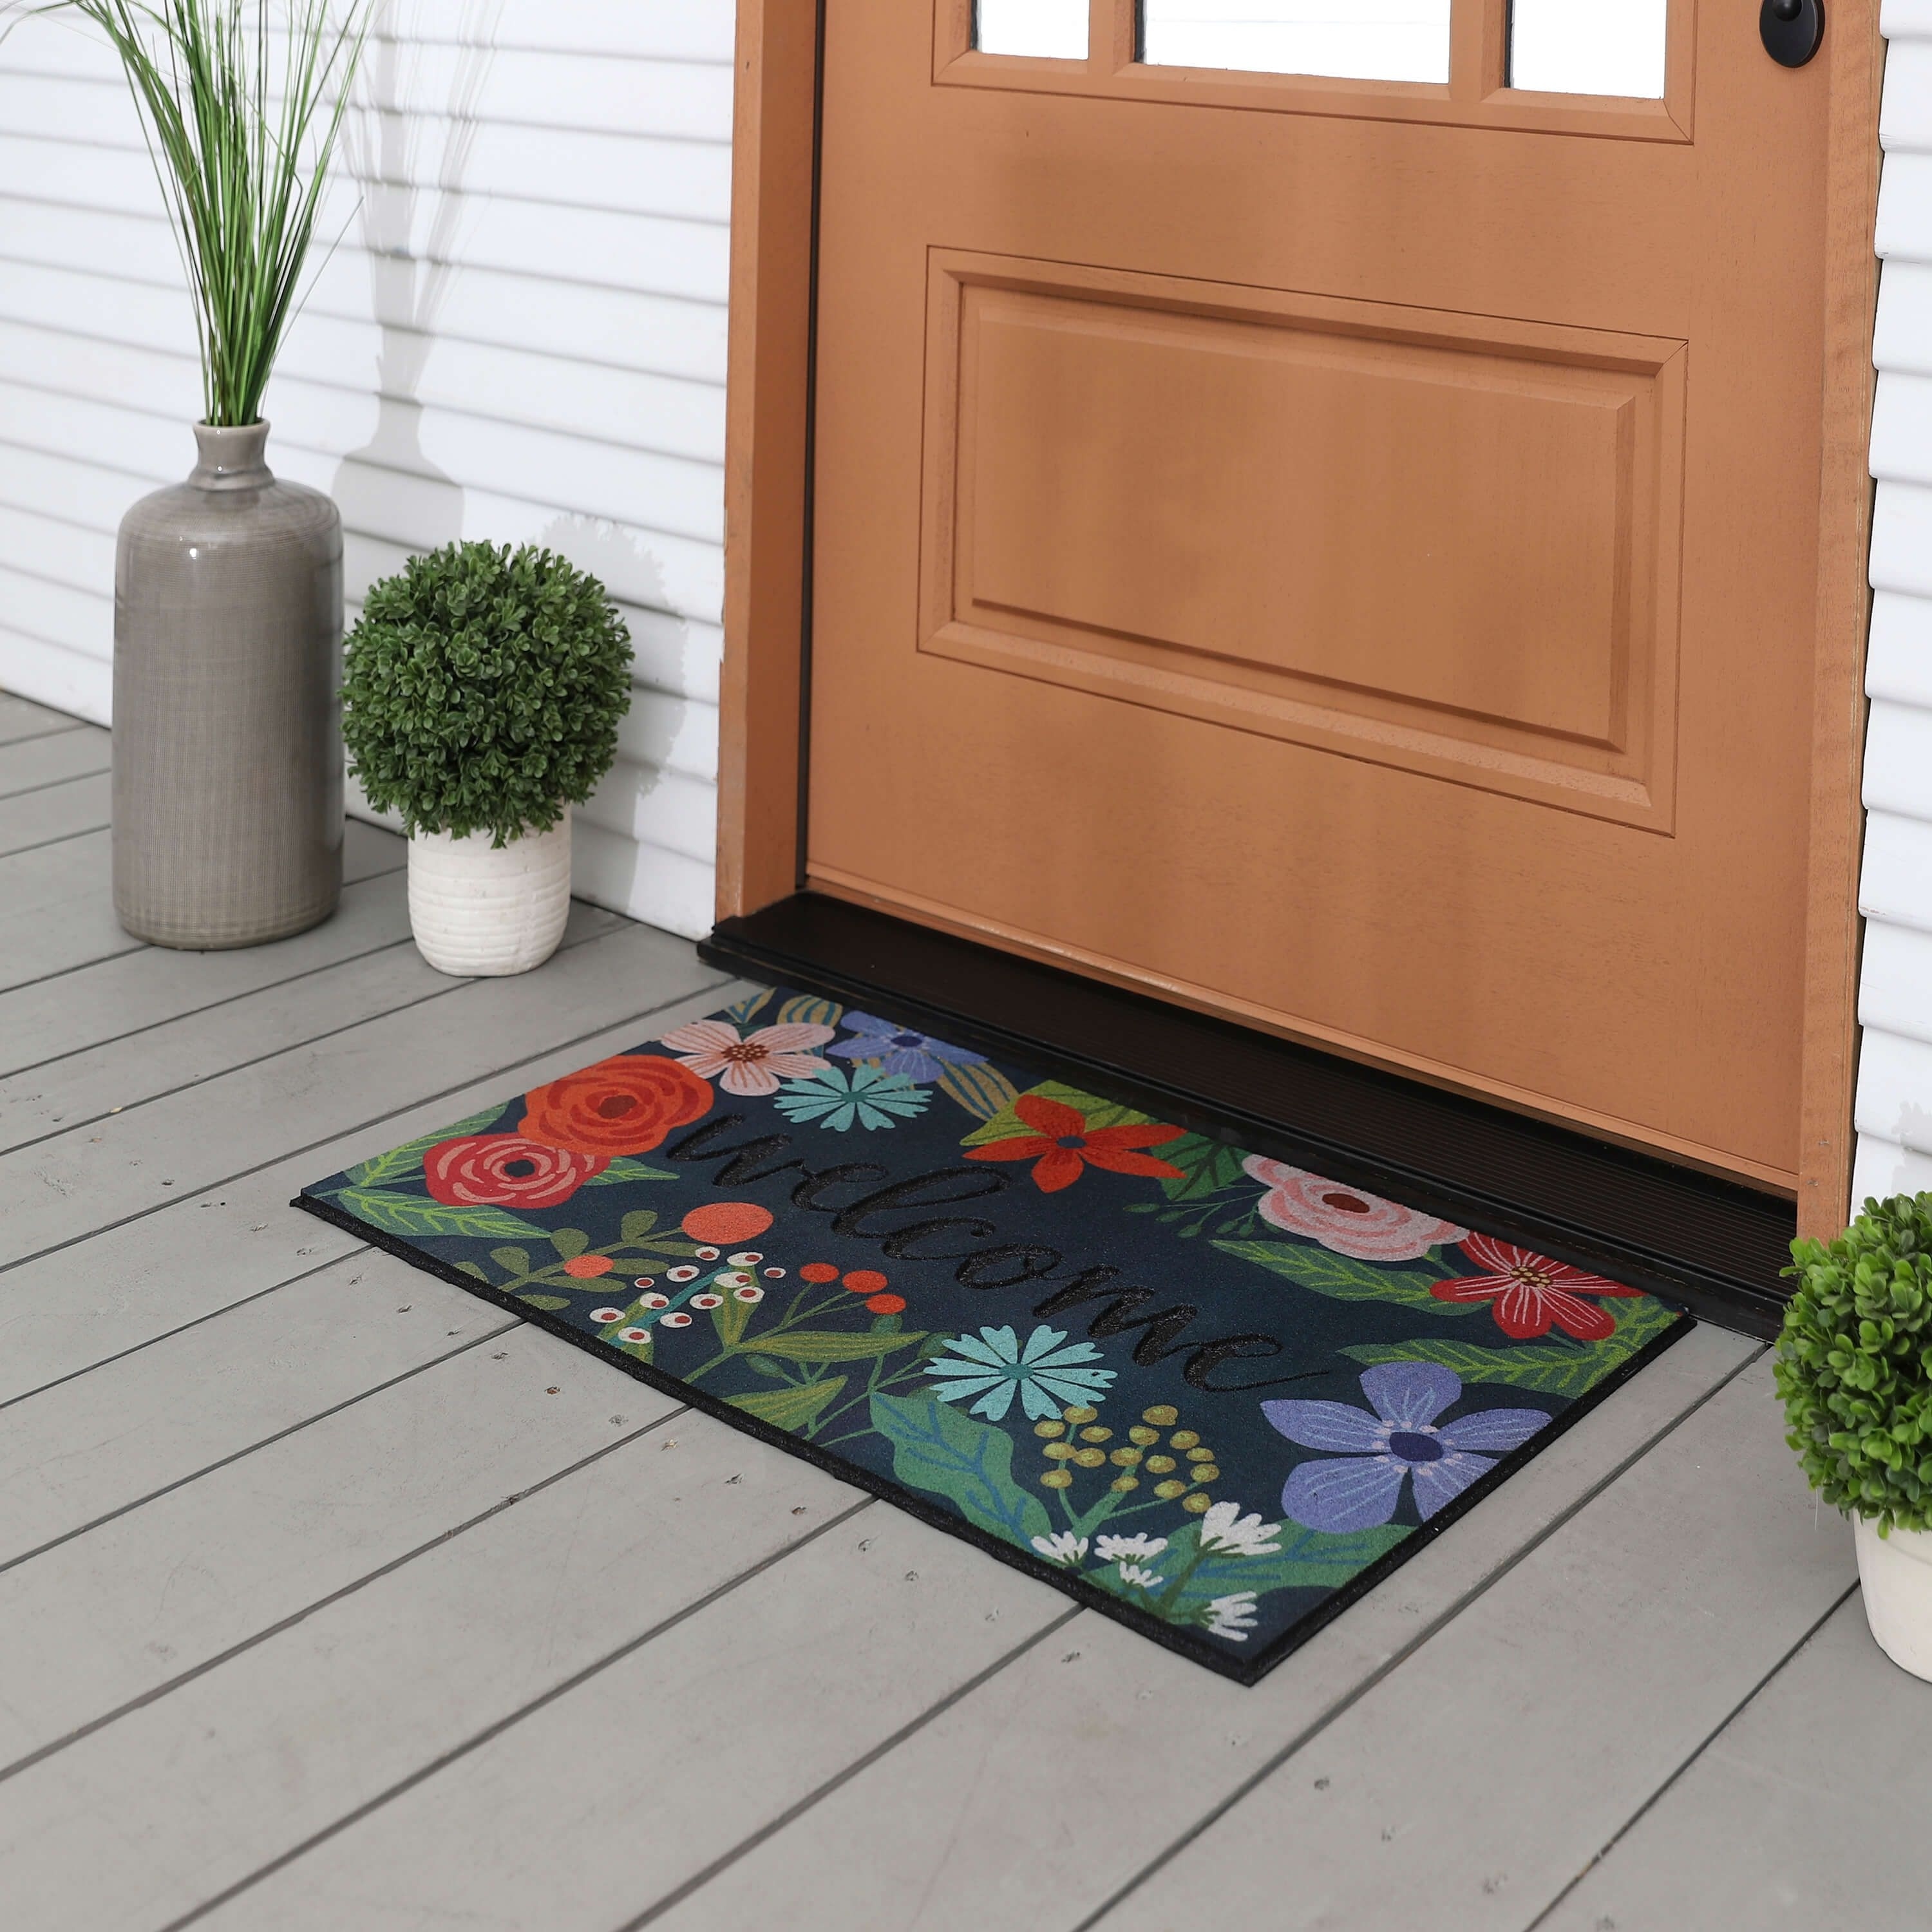 https://ak1.ostkcdn.com/images/products/is/images/direct/9dc39f121228d0f94eb9bc996dfae0ab2cb5df93/Mohawk-Home-Doorscapes-Spring-Sunset-Welcome-Door-Mat.jpg